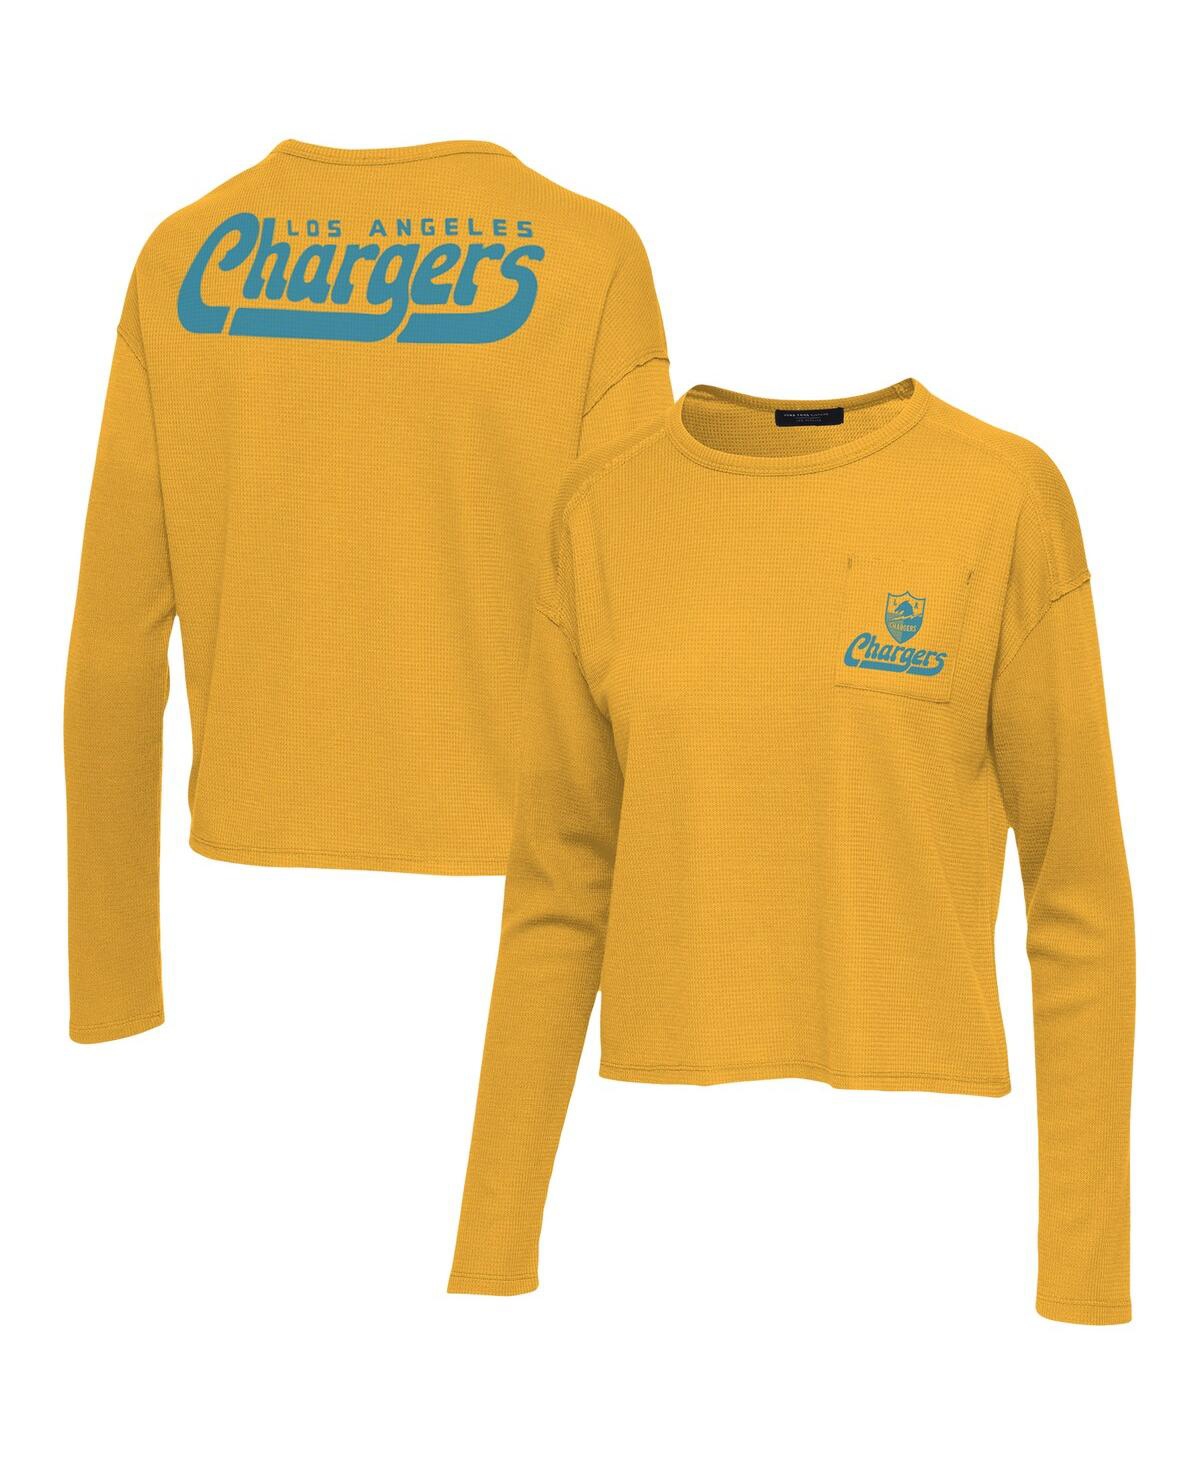 JUNK FOOD WOMEN'S JUNK FOOD GOLD LOS ANGELES CHARGERS POCKET THERMAL LONG SLEEVE T-SHIRT